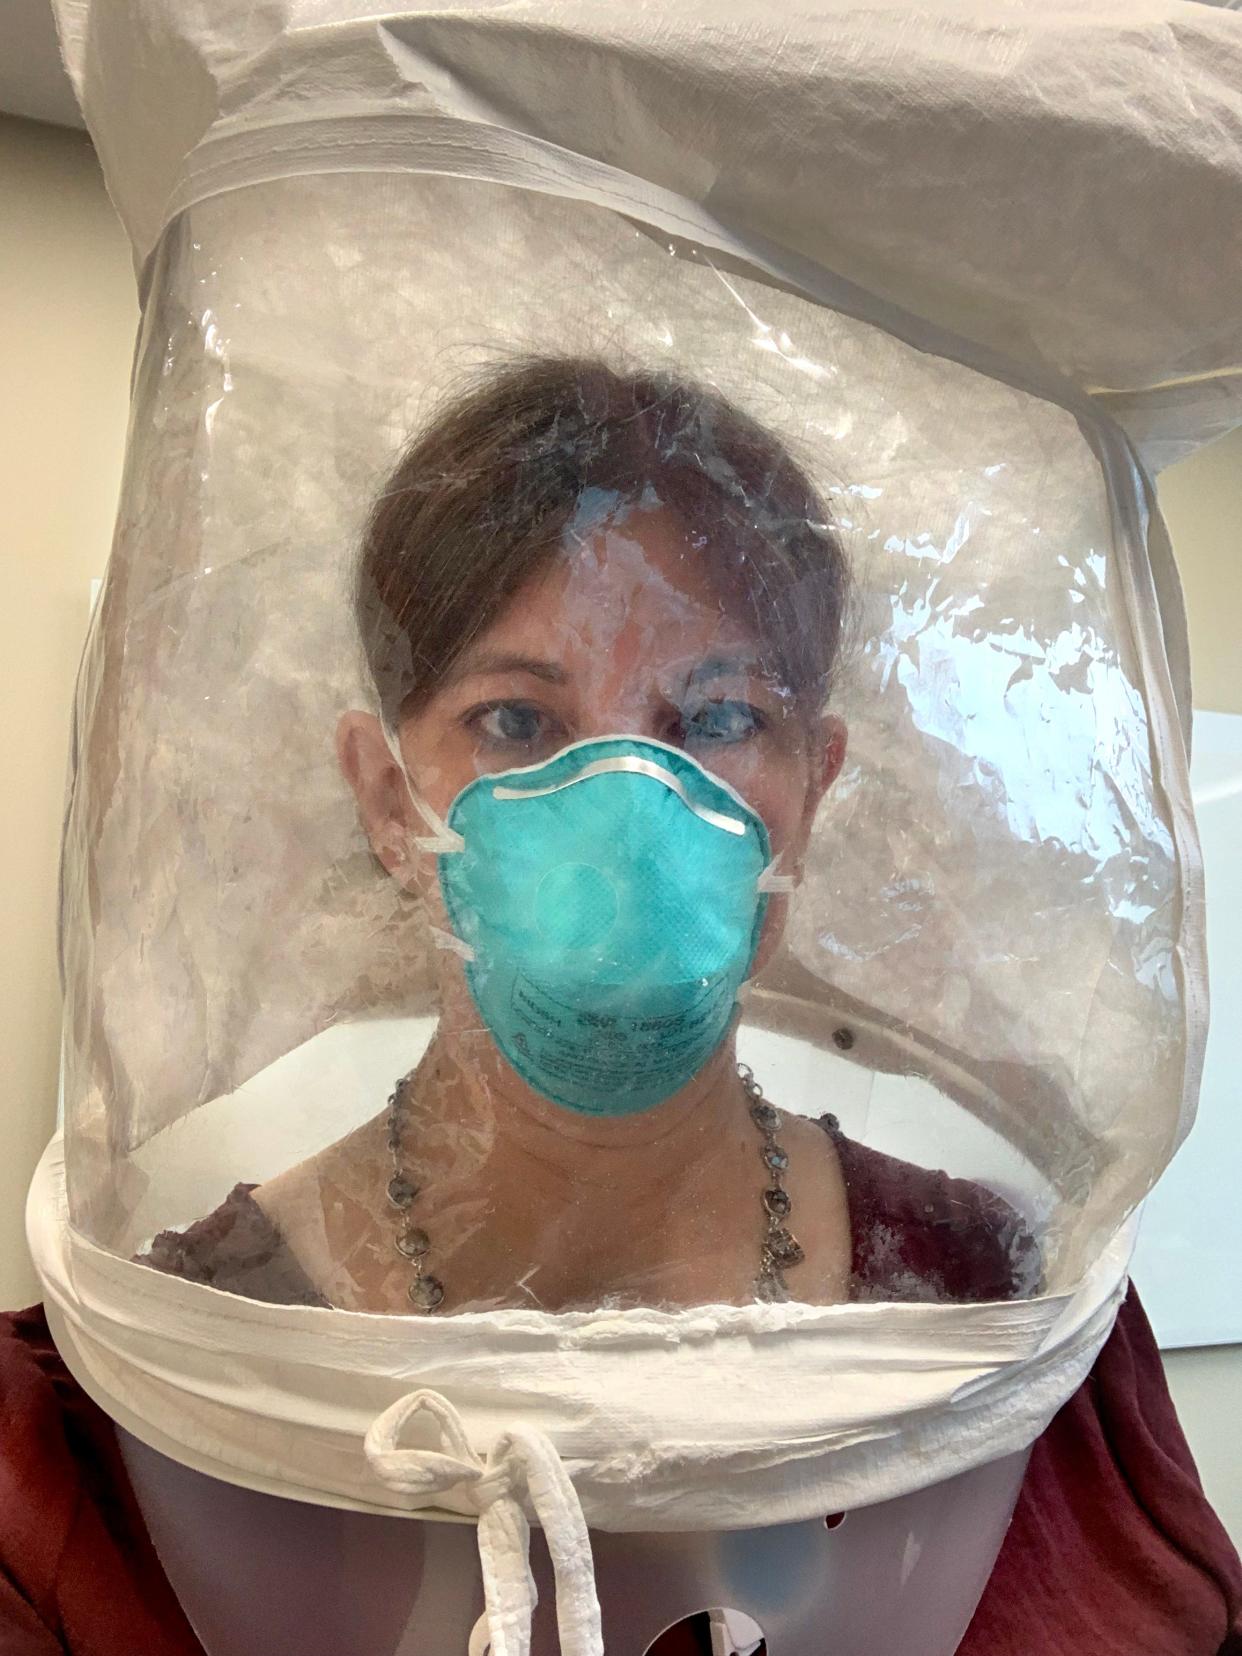 Jennifer Towery dons a special hood while being fitted for an N95 mask. Towery is one of more than 170 office workers from OSF who have volunteered to take on duties in the hospital during the record-breaking COVID-19 surge.